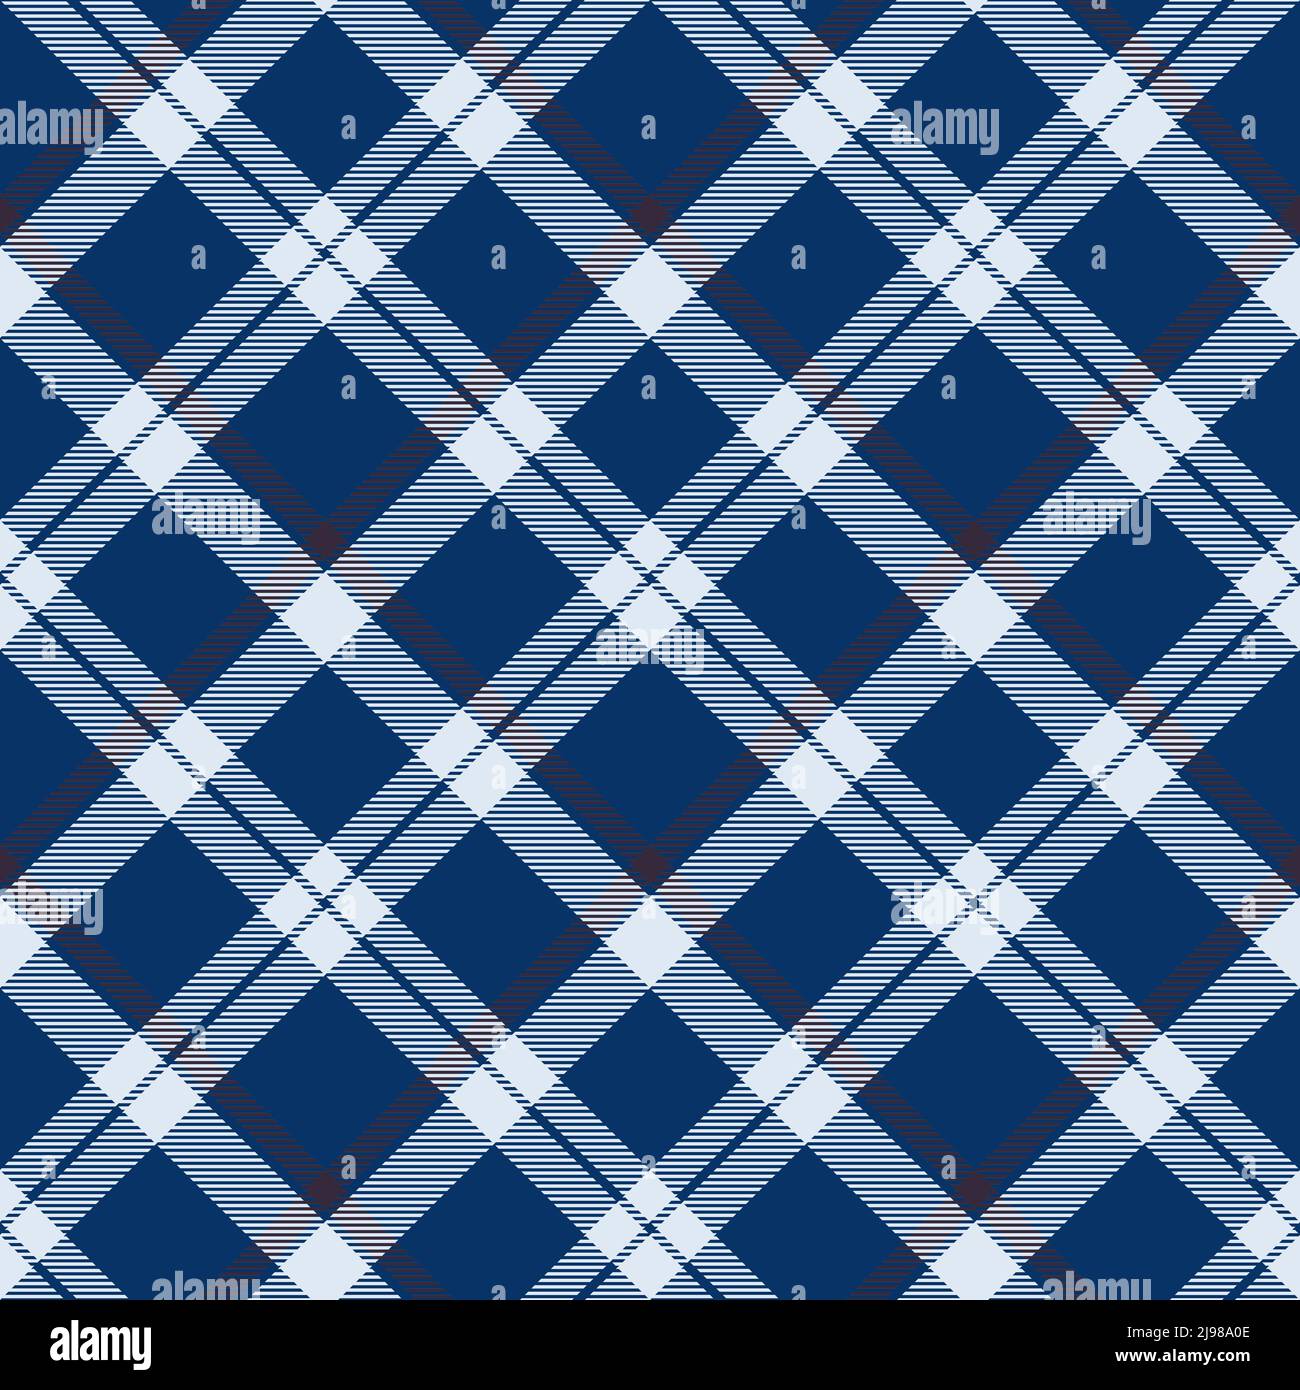 Fabric pattern vector with lines and square tartan shapes